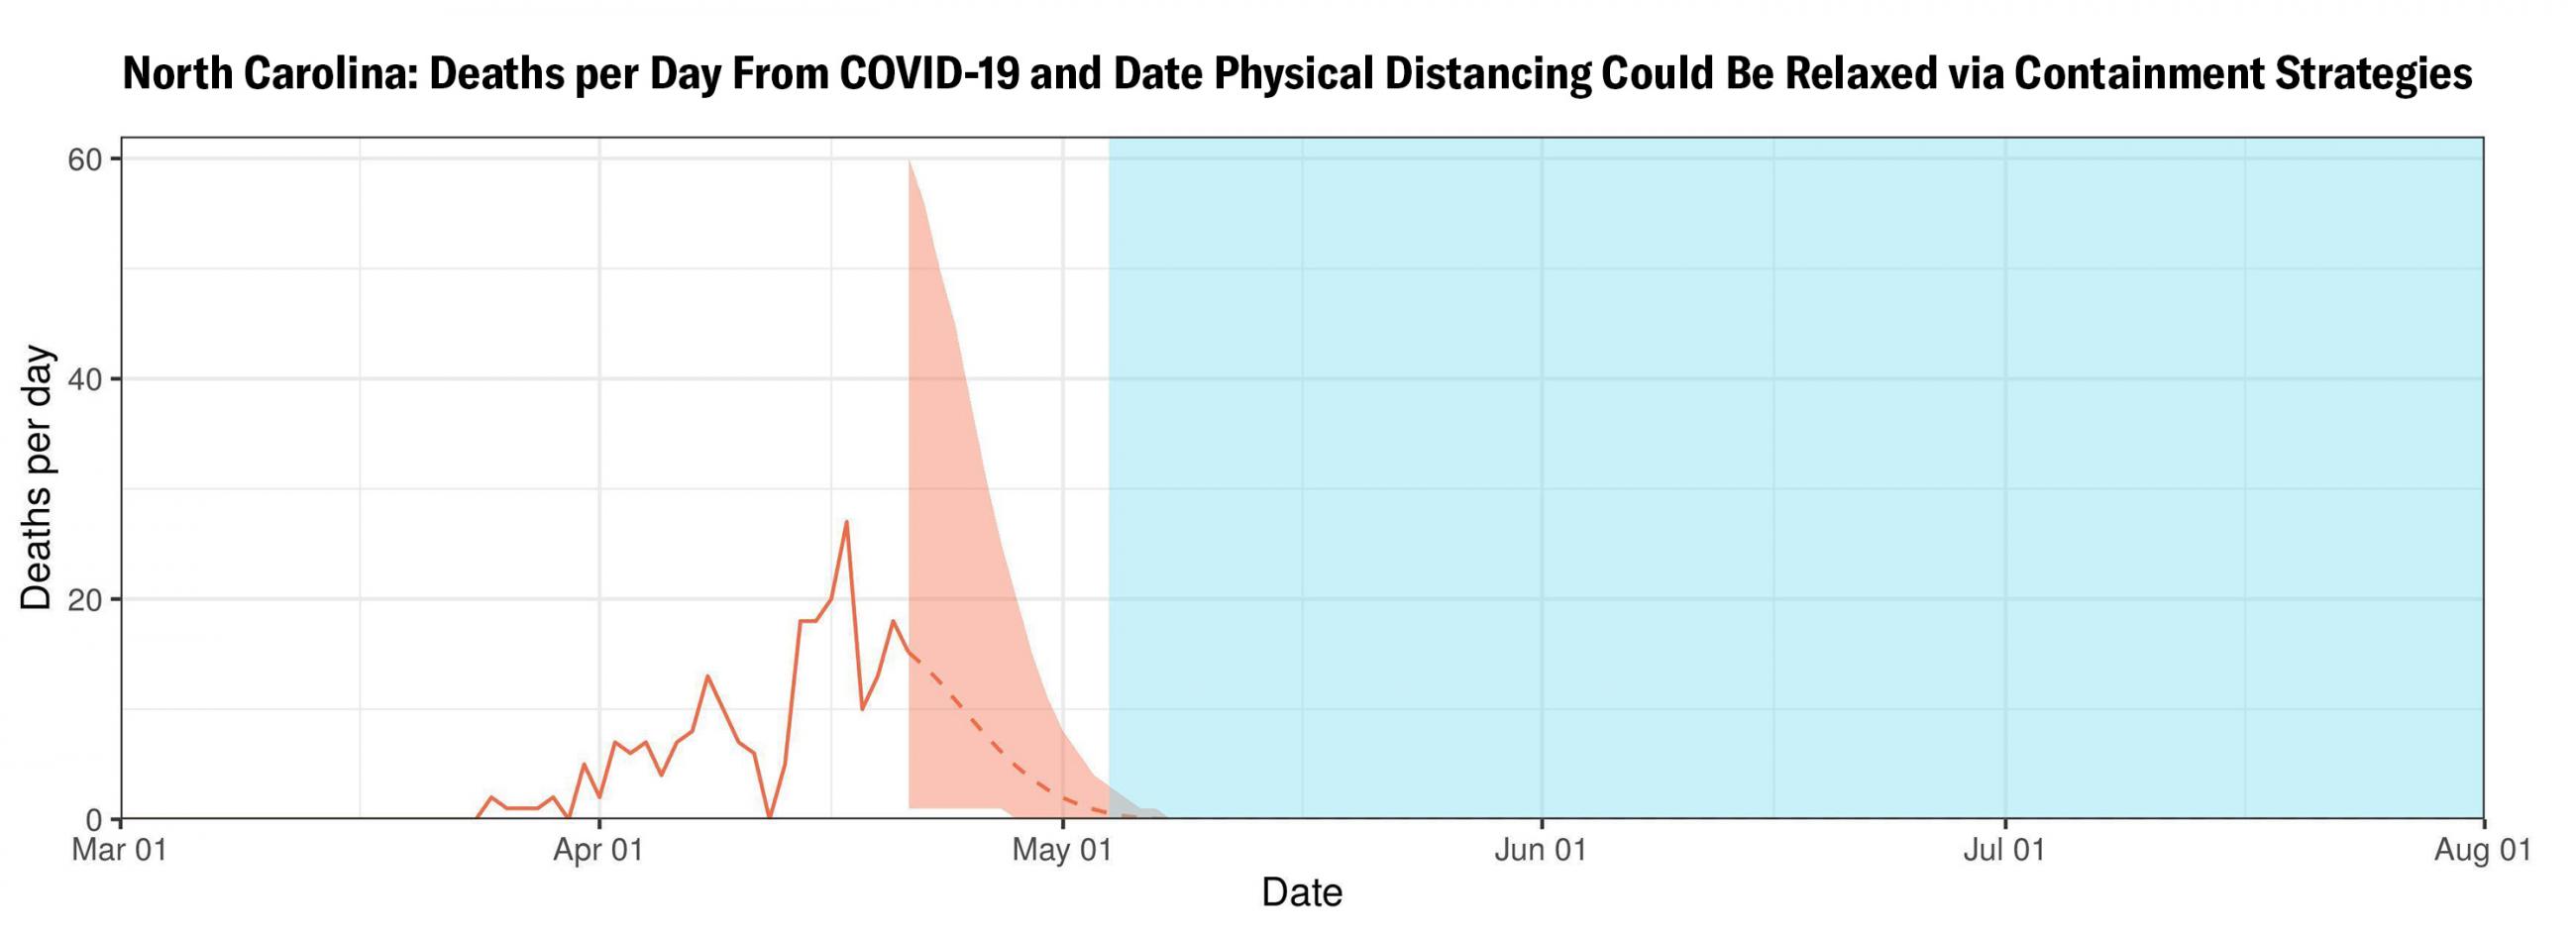 Figure shows North Carolina deaths per day from covid-19 and date physical distancing could be relaxed via containment strategies